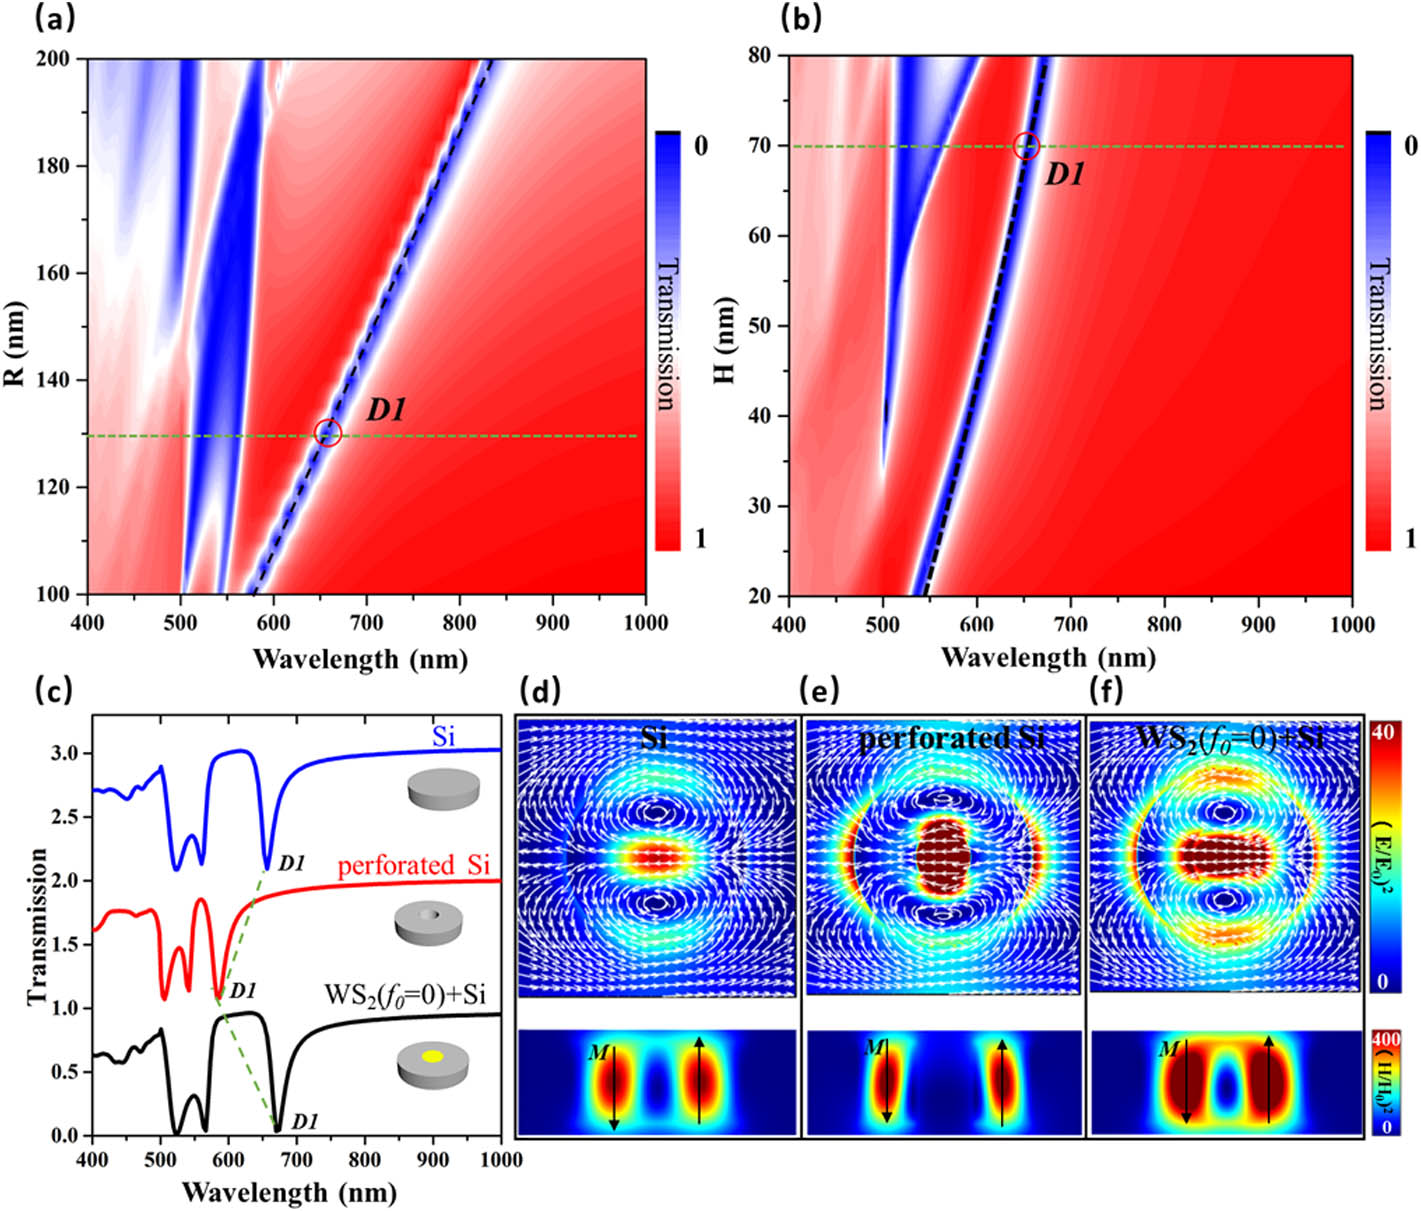 Analyses of the nonradiating anapole mode in the heterostructures. (a) Simulated transmission contour map as a function of radius of the Si nanodisk array (R=100–200 nm), where the height of the Si nanodisk H=70 nm. (b) Simulated transmission contour map as a function of height of the Si nanodisk array (H=20–80 nm), where the radius of the Si nanodisk R=130 nm. (c) Simulated transmission spectrum of the Si nanodisk array (blue solid curve); the Si nanodisk array with air hole, where the radius of air hole is 50 nm, the height is 70 nm, and radius of the Si nanodisk R=130 nm (red solid curve); and the Si nanodisk-bulk WS2 heterostructure array, where f0=0 (black solid curve). The electric-field enhancement distribution in the x−y plane (upper panels) and the magnetic-field enhancement distribution in the y−z plane (lower panels) of the anapole mode for the (d) Si nanodisk array, (e) the Si nanodisk array with air holes, and (f) the Si nanodisk-bulk WS2 heterostructure array, where f0=0. The black arrows represent the magnetic dipole M in lower panels of (d)–(f).